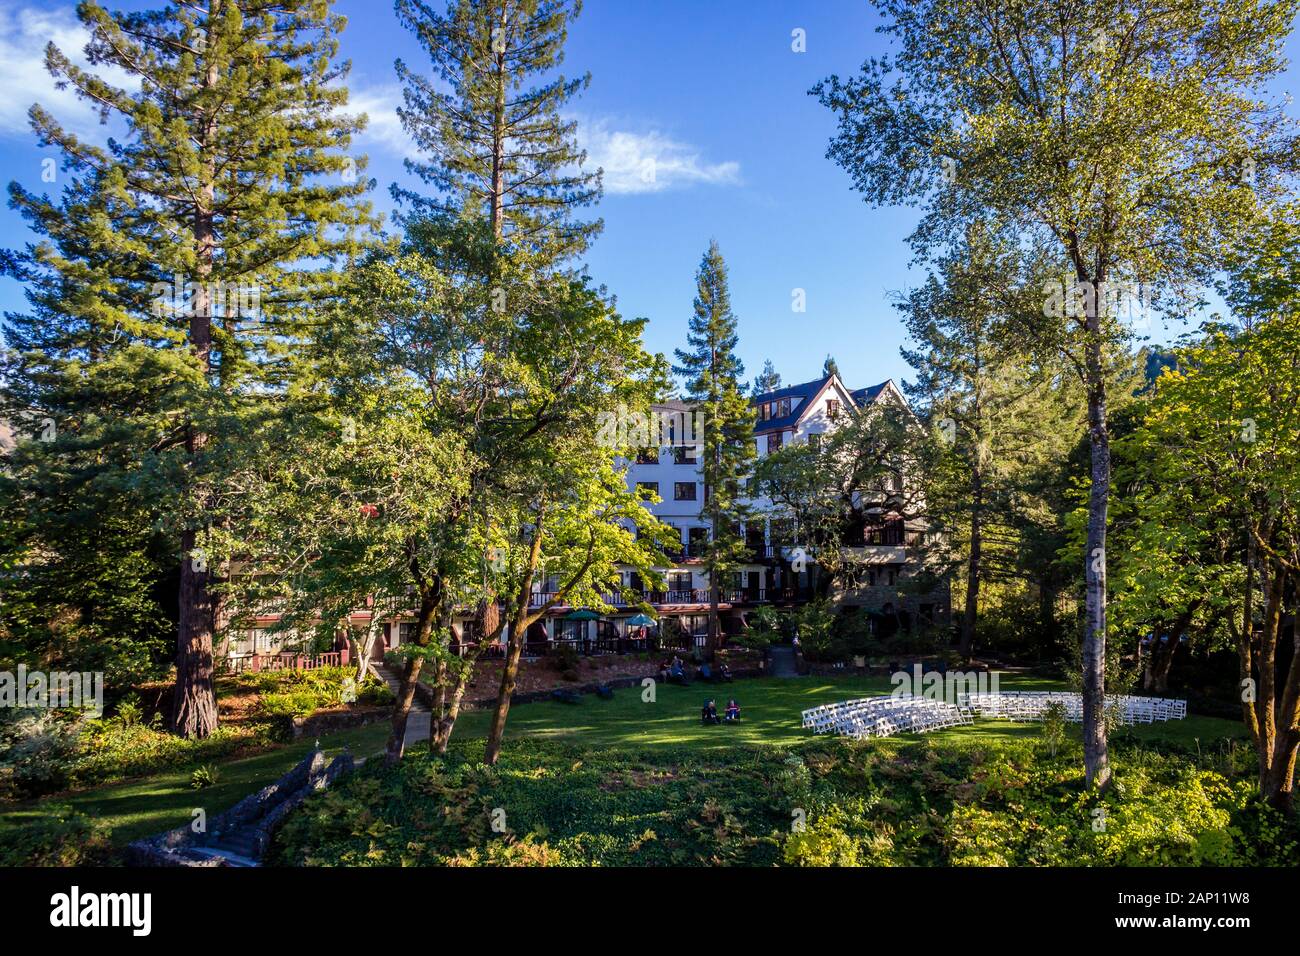 Benbow, California, United States of America - October 10, 2014 : Late afternoon at the Benbow Inn Stock Photo